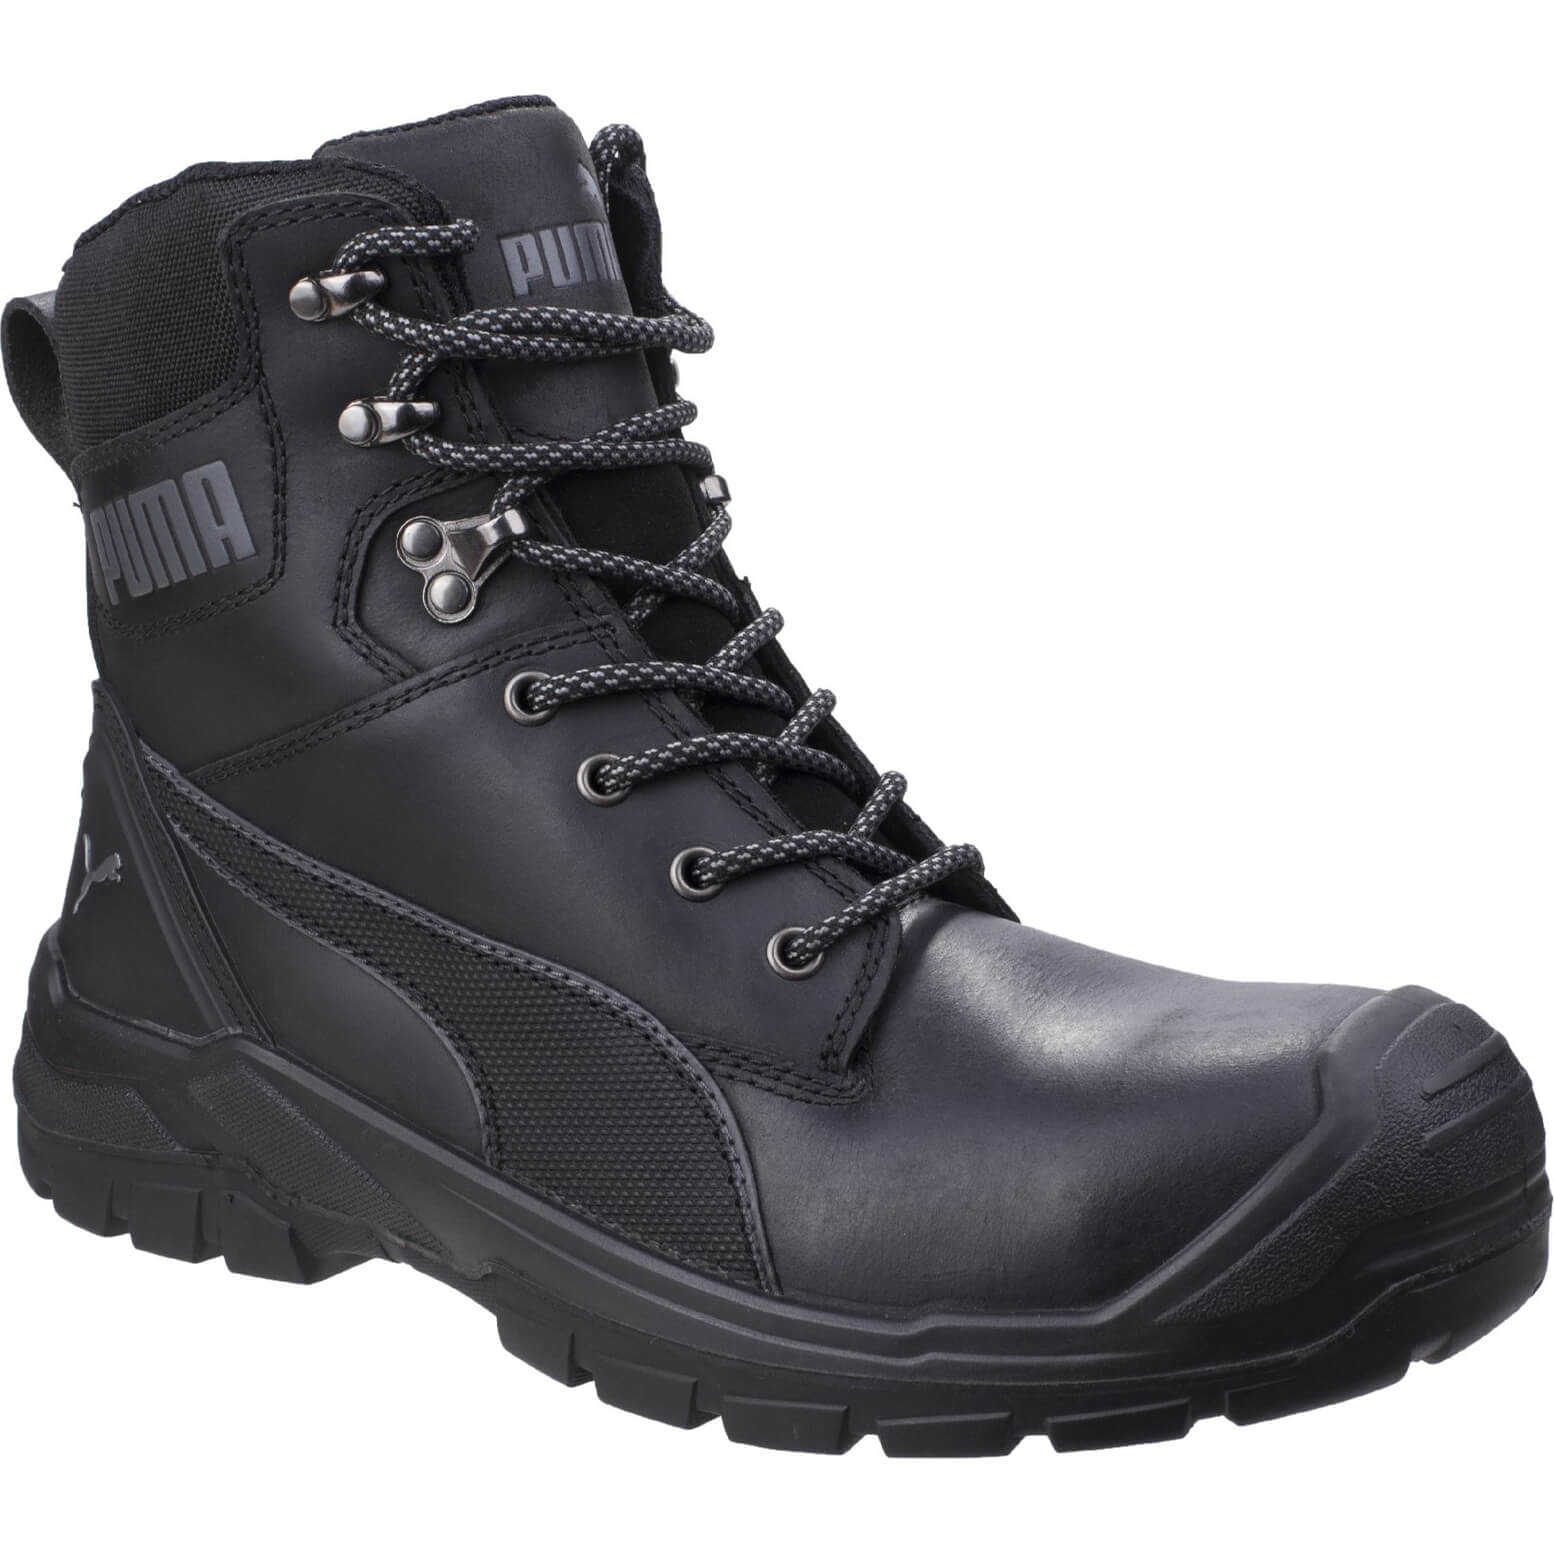 Image of Puma Mens Safety Conquest High Safety Boots Black Size 10.5